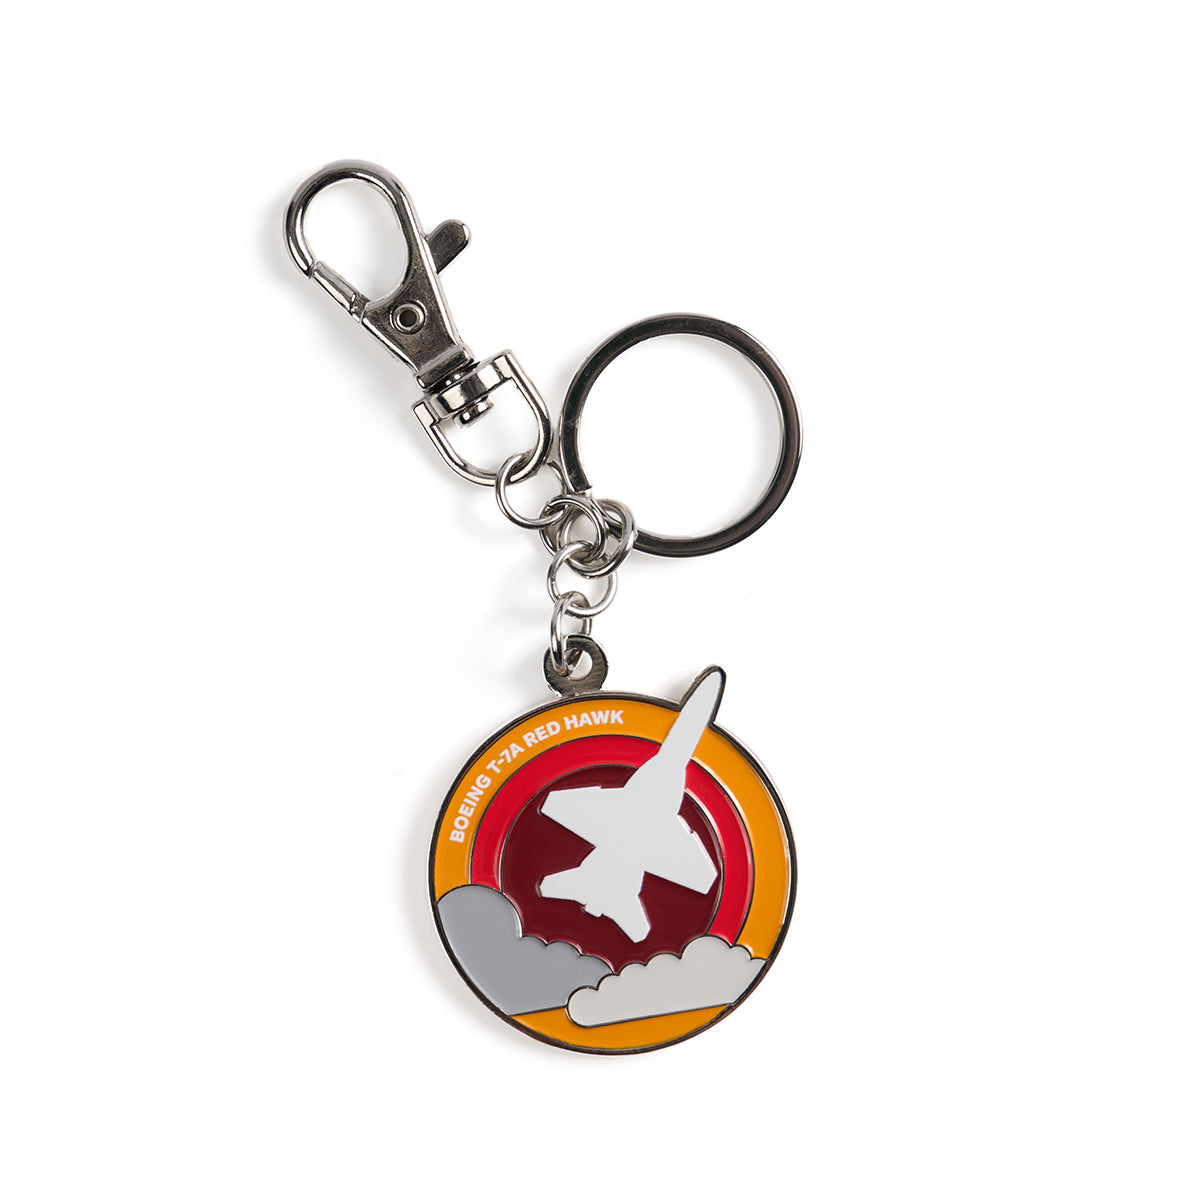  Skyward keychain, featuring the iconic Boeing T-7A Red Hawk in a roundel design. 